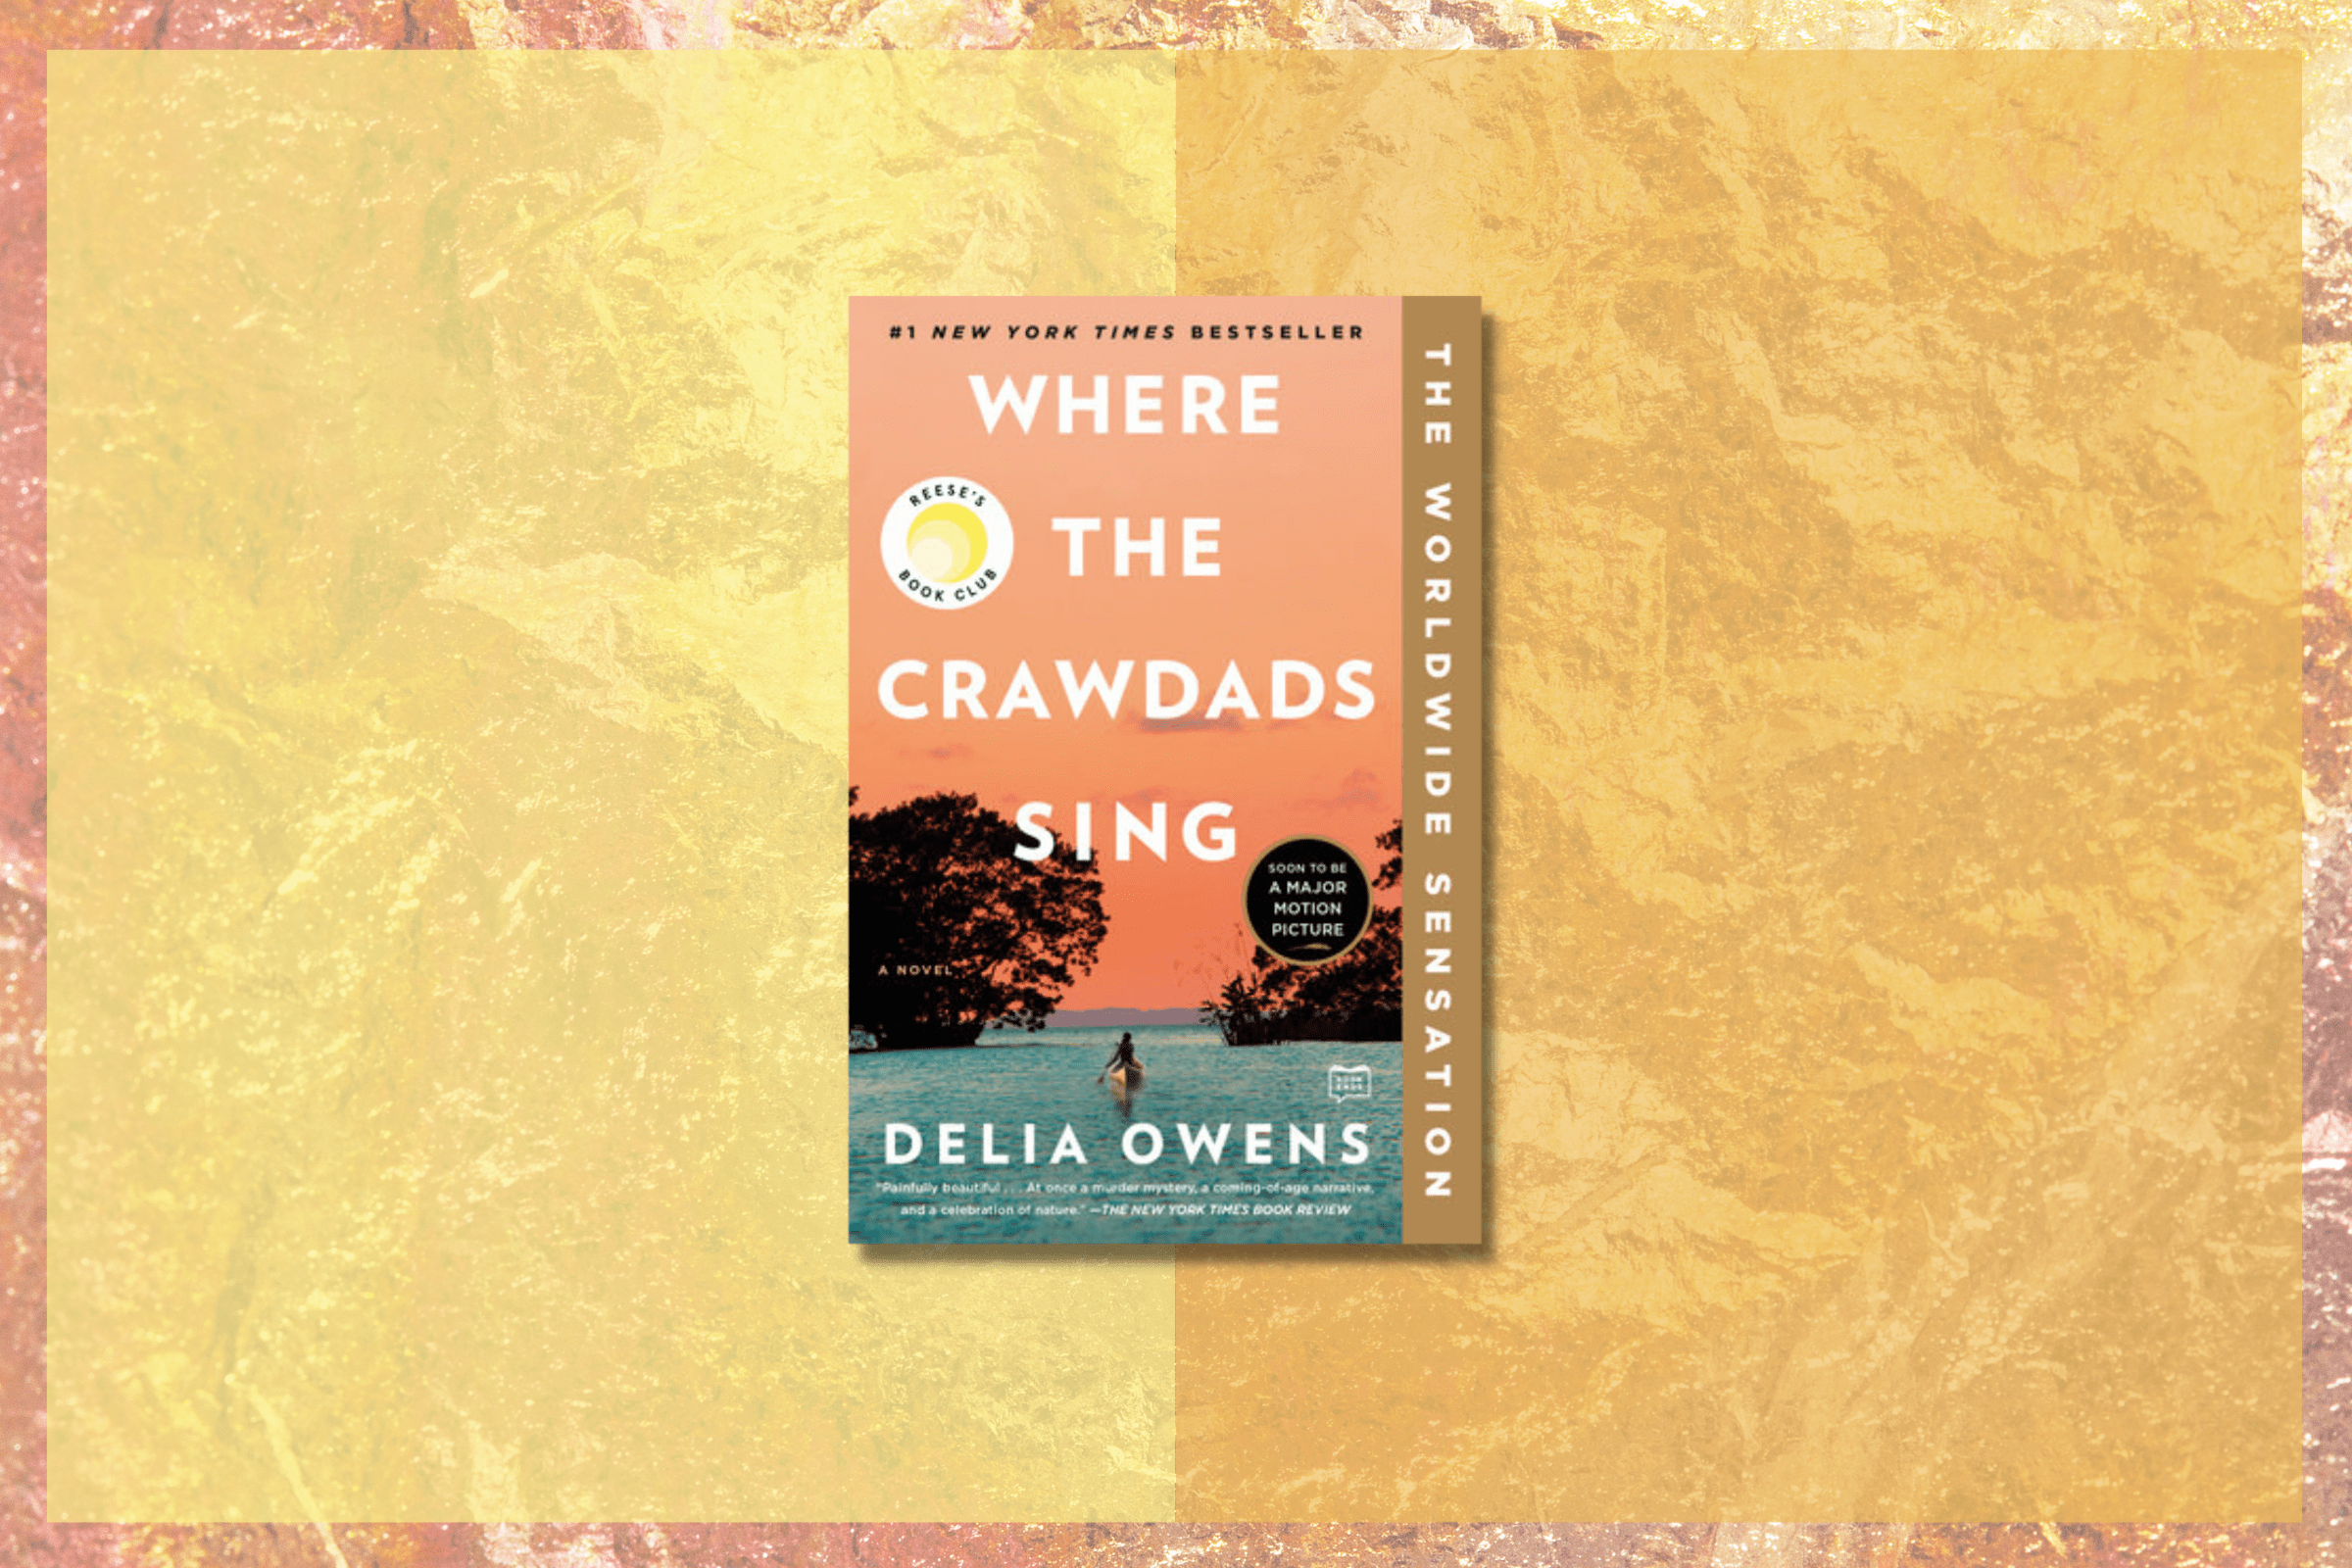 Where the Crawdads Sing book jacket